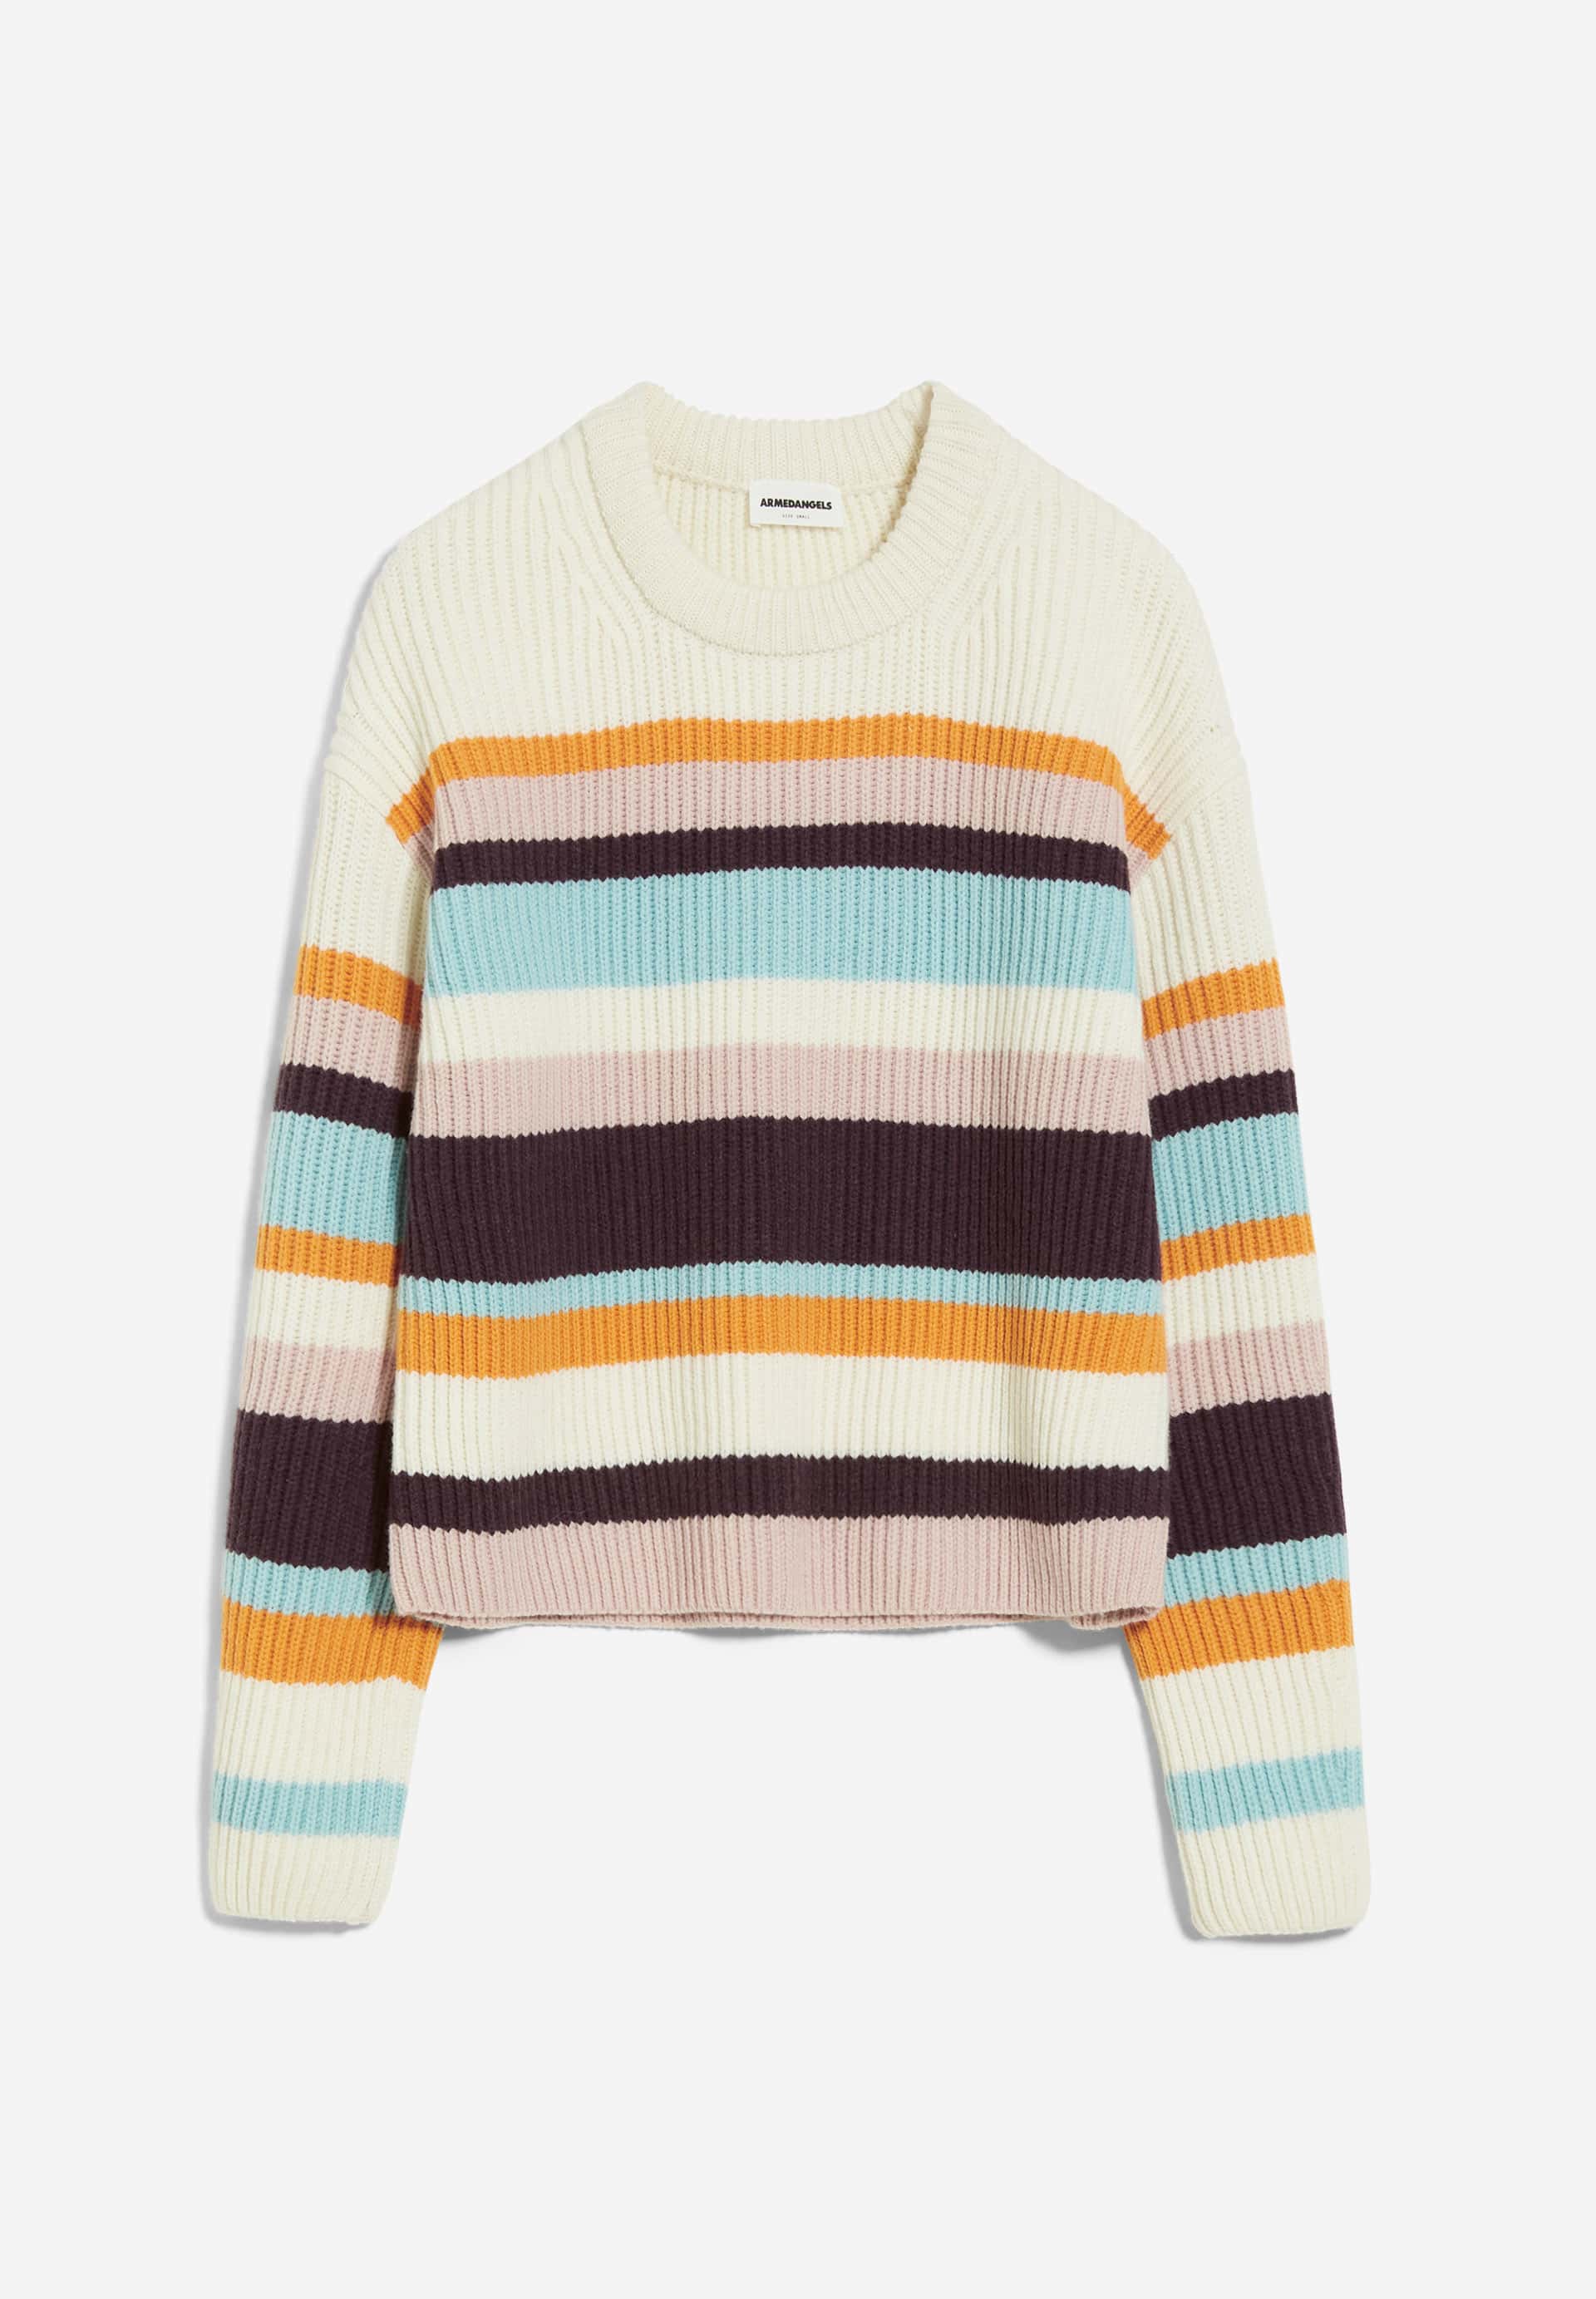 NAARUKO MULTICOLOR Knit Sweater Oversized Fit made of Organic Wool Mix